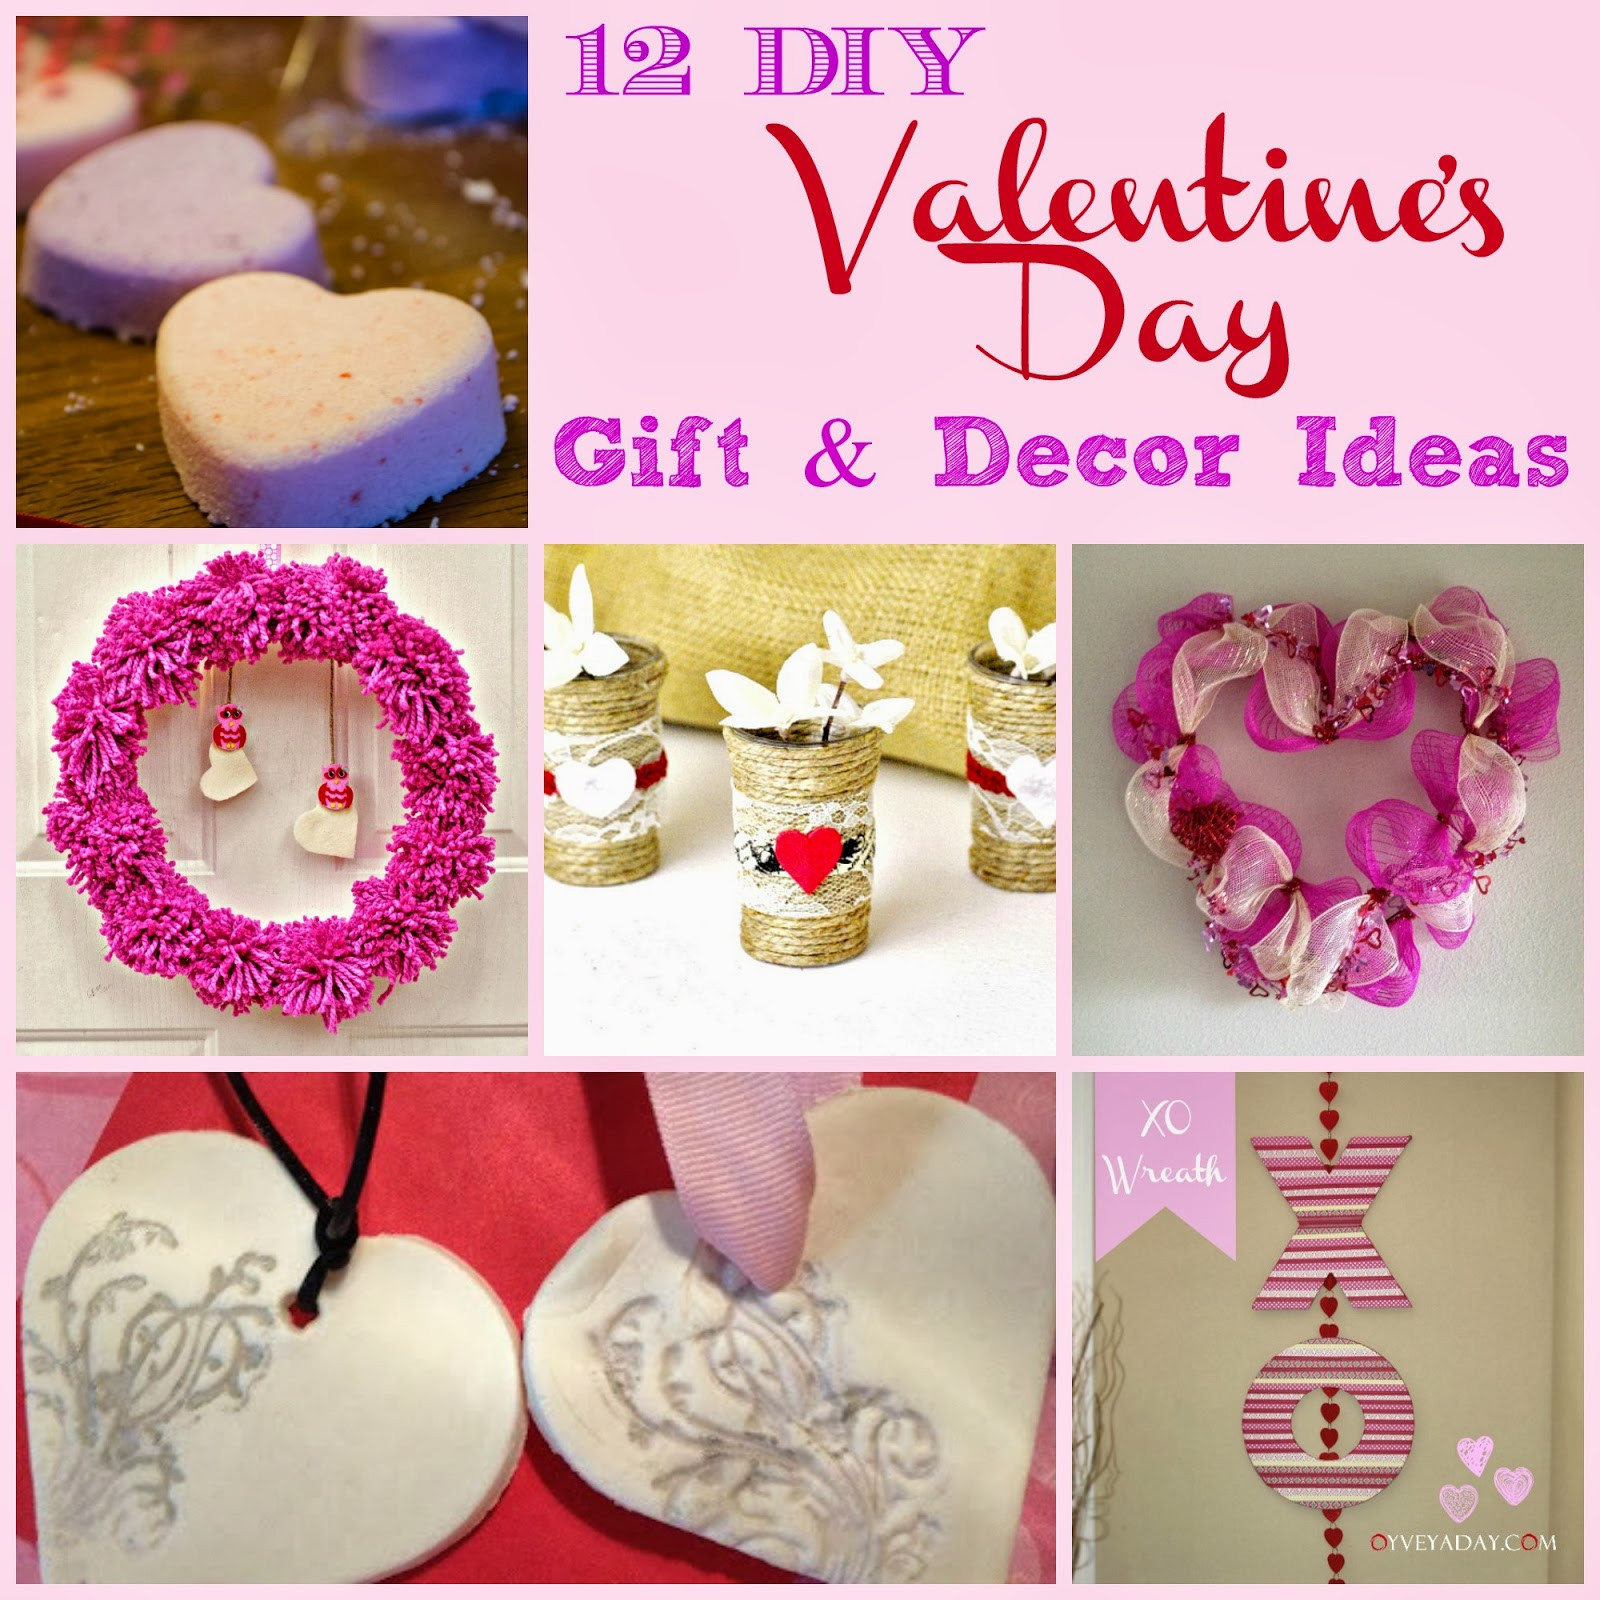 Valentines Gift Ideas Diy
 12 DIY Valentine s Day Gift & Decor Ideas Outnumbered 3 to 1